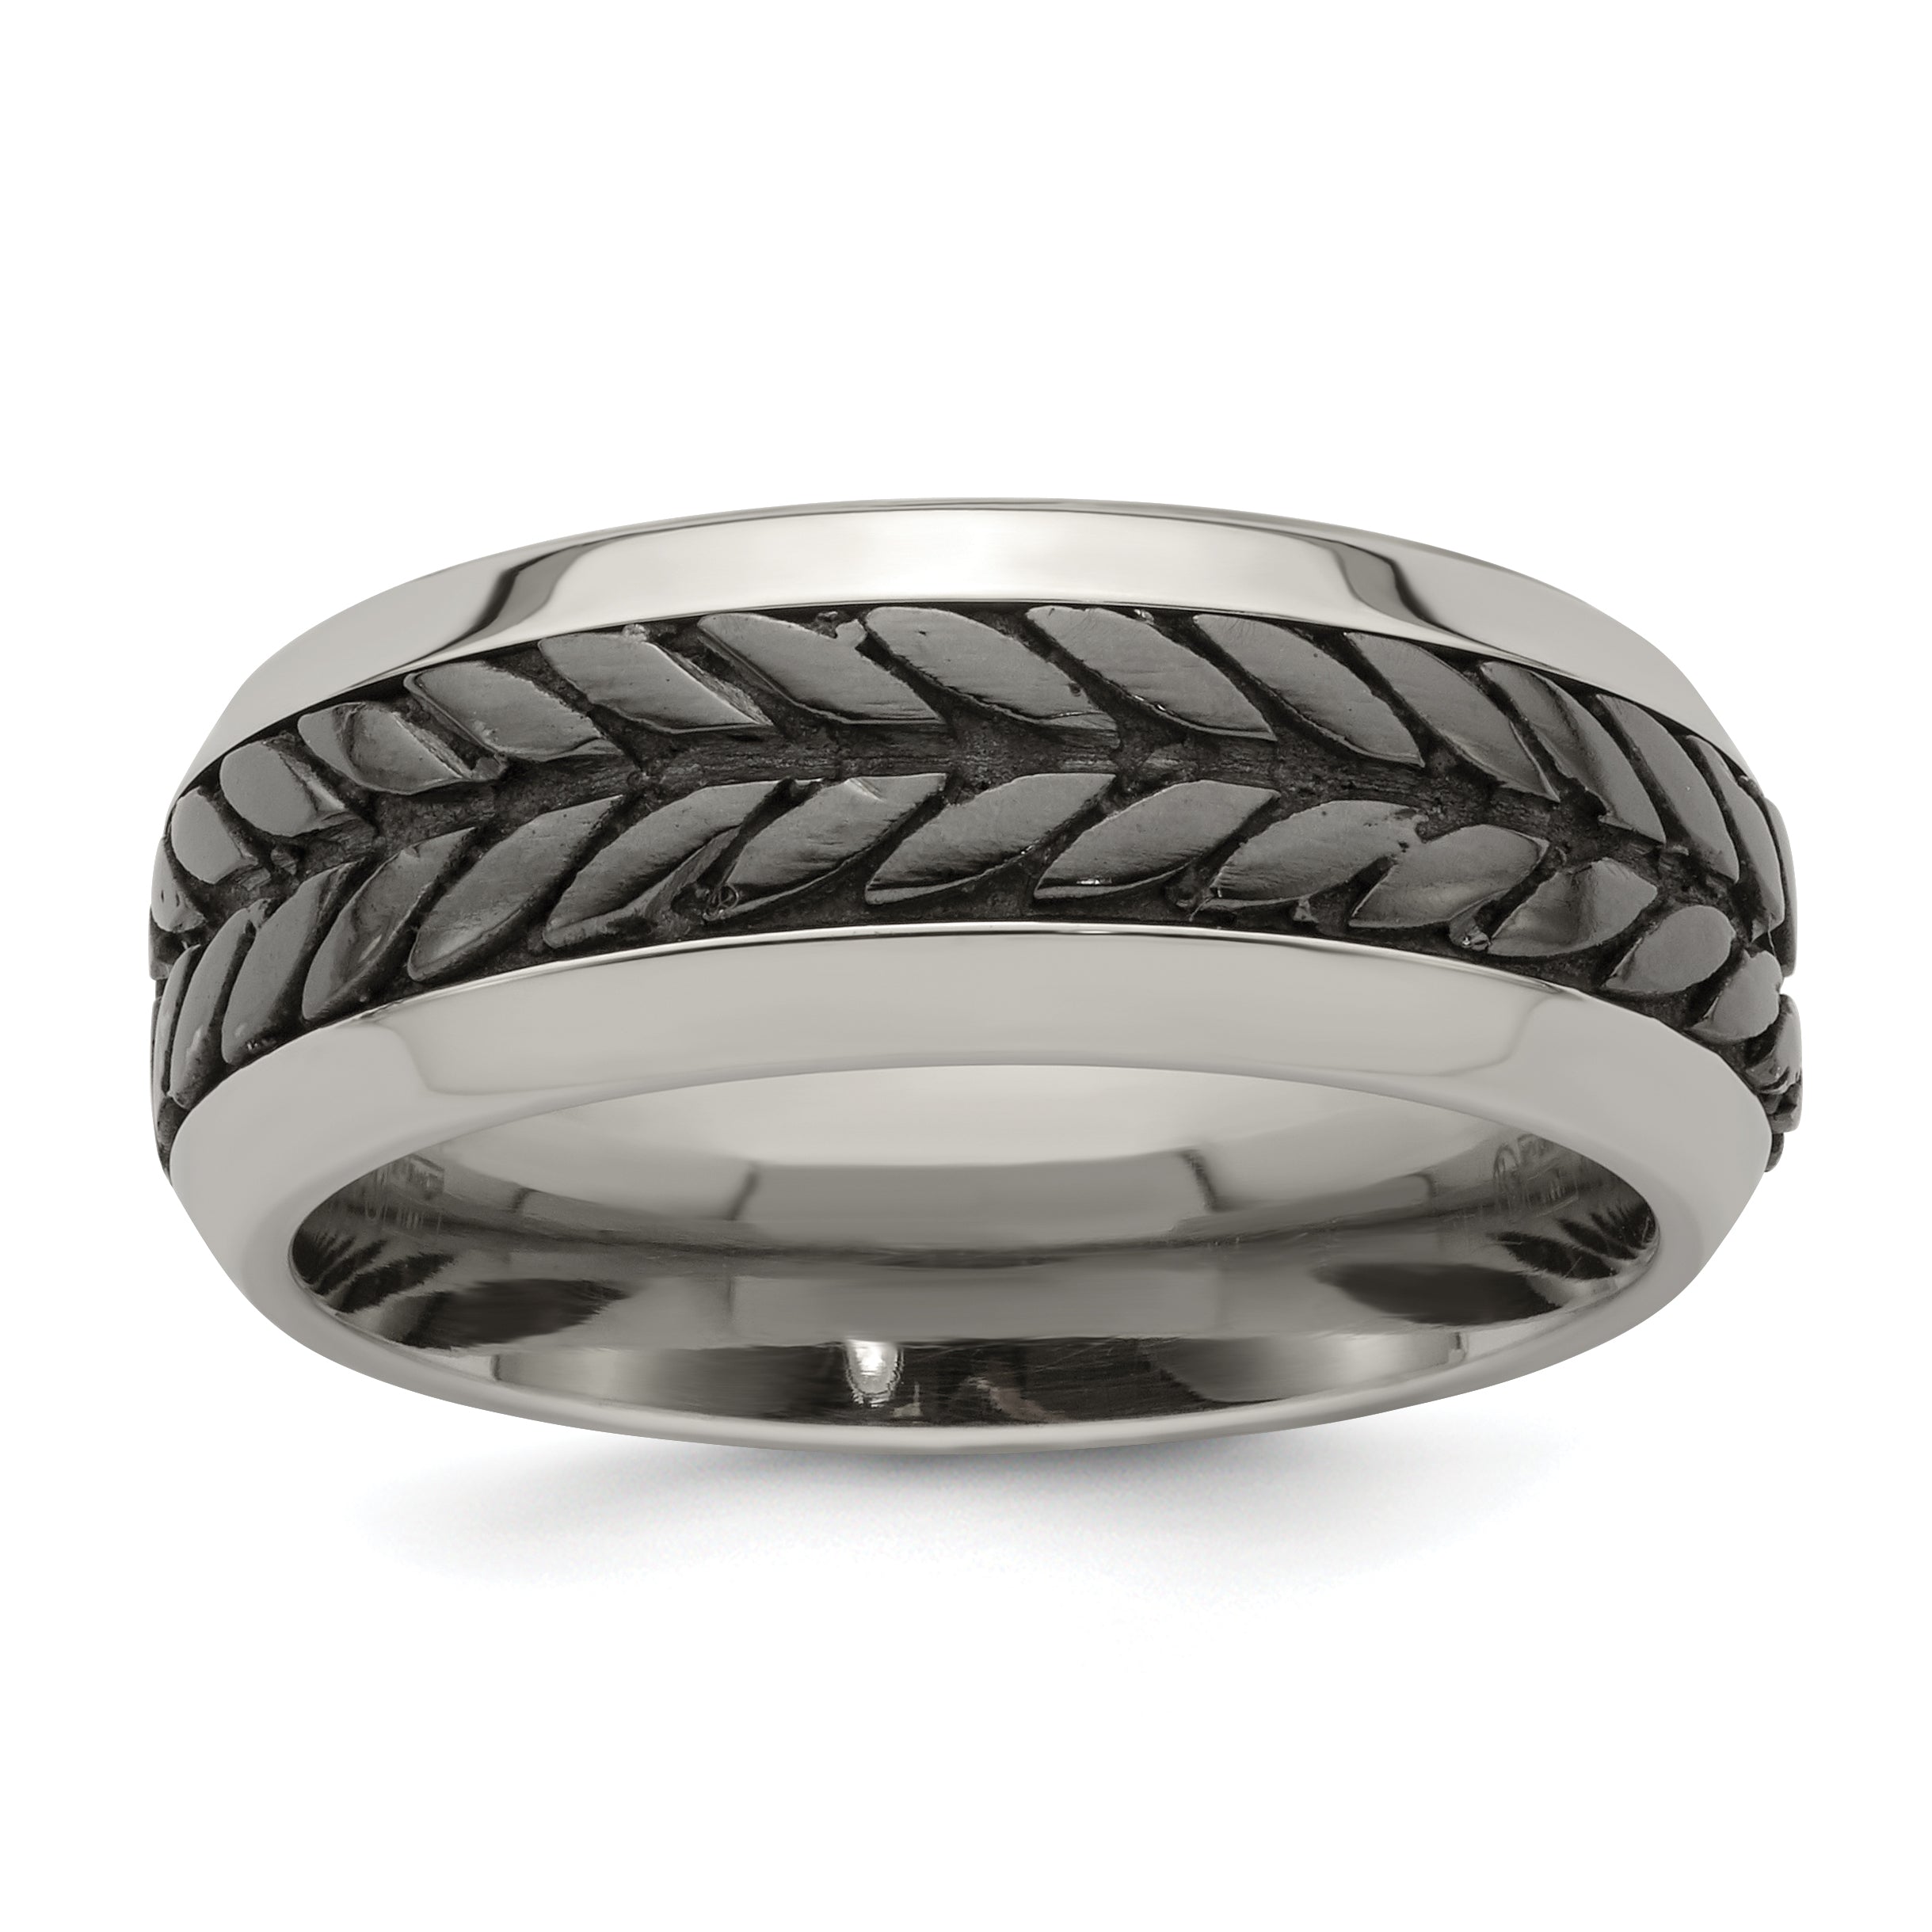 Edward Mirell Stainless Steel and Black Ti Rope Design Beveled Casted 9mm Band